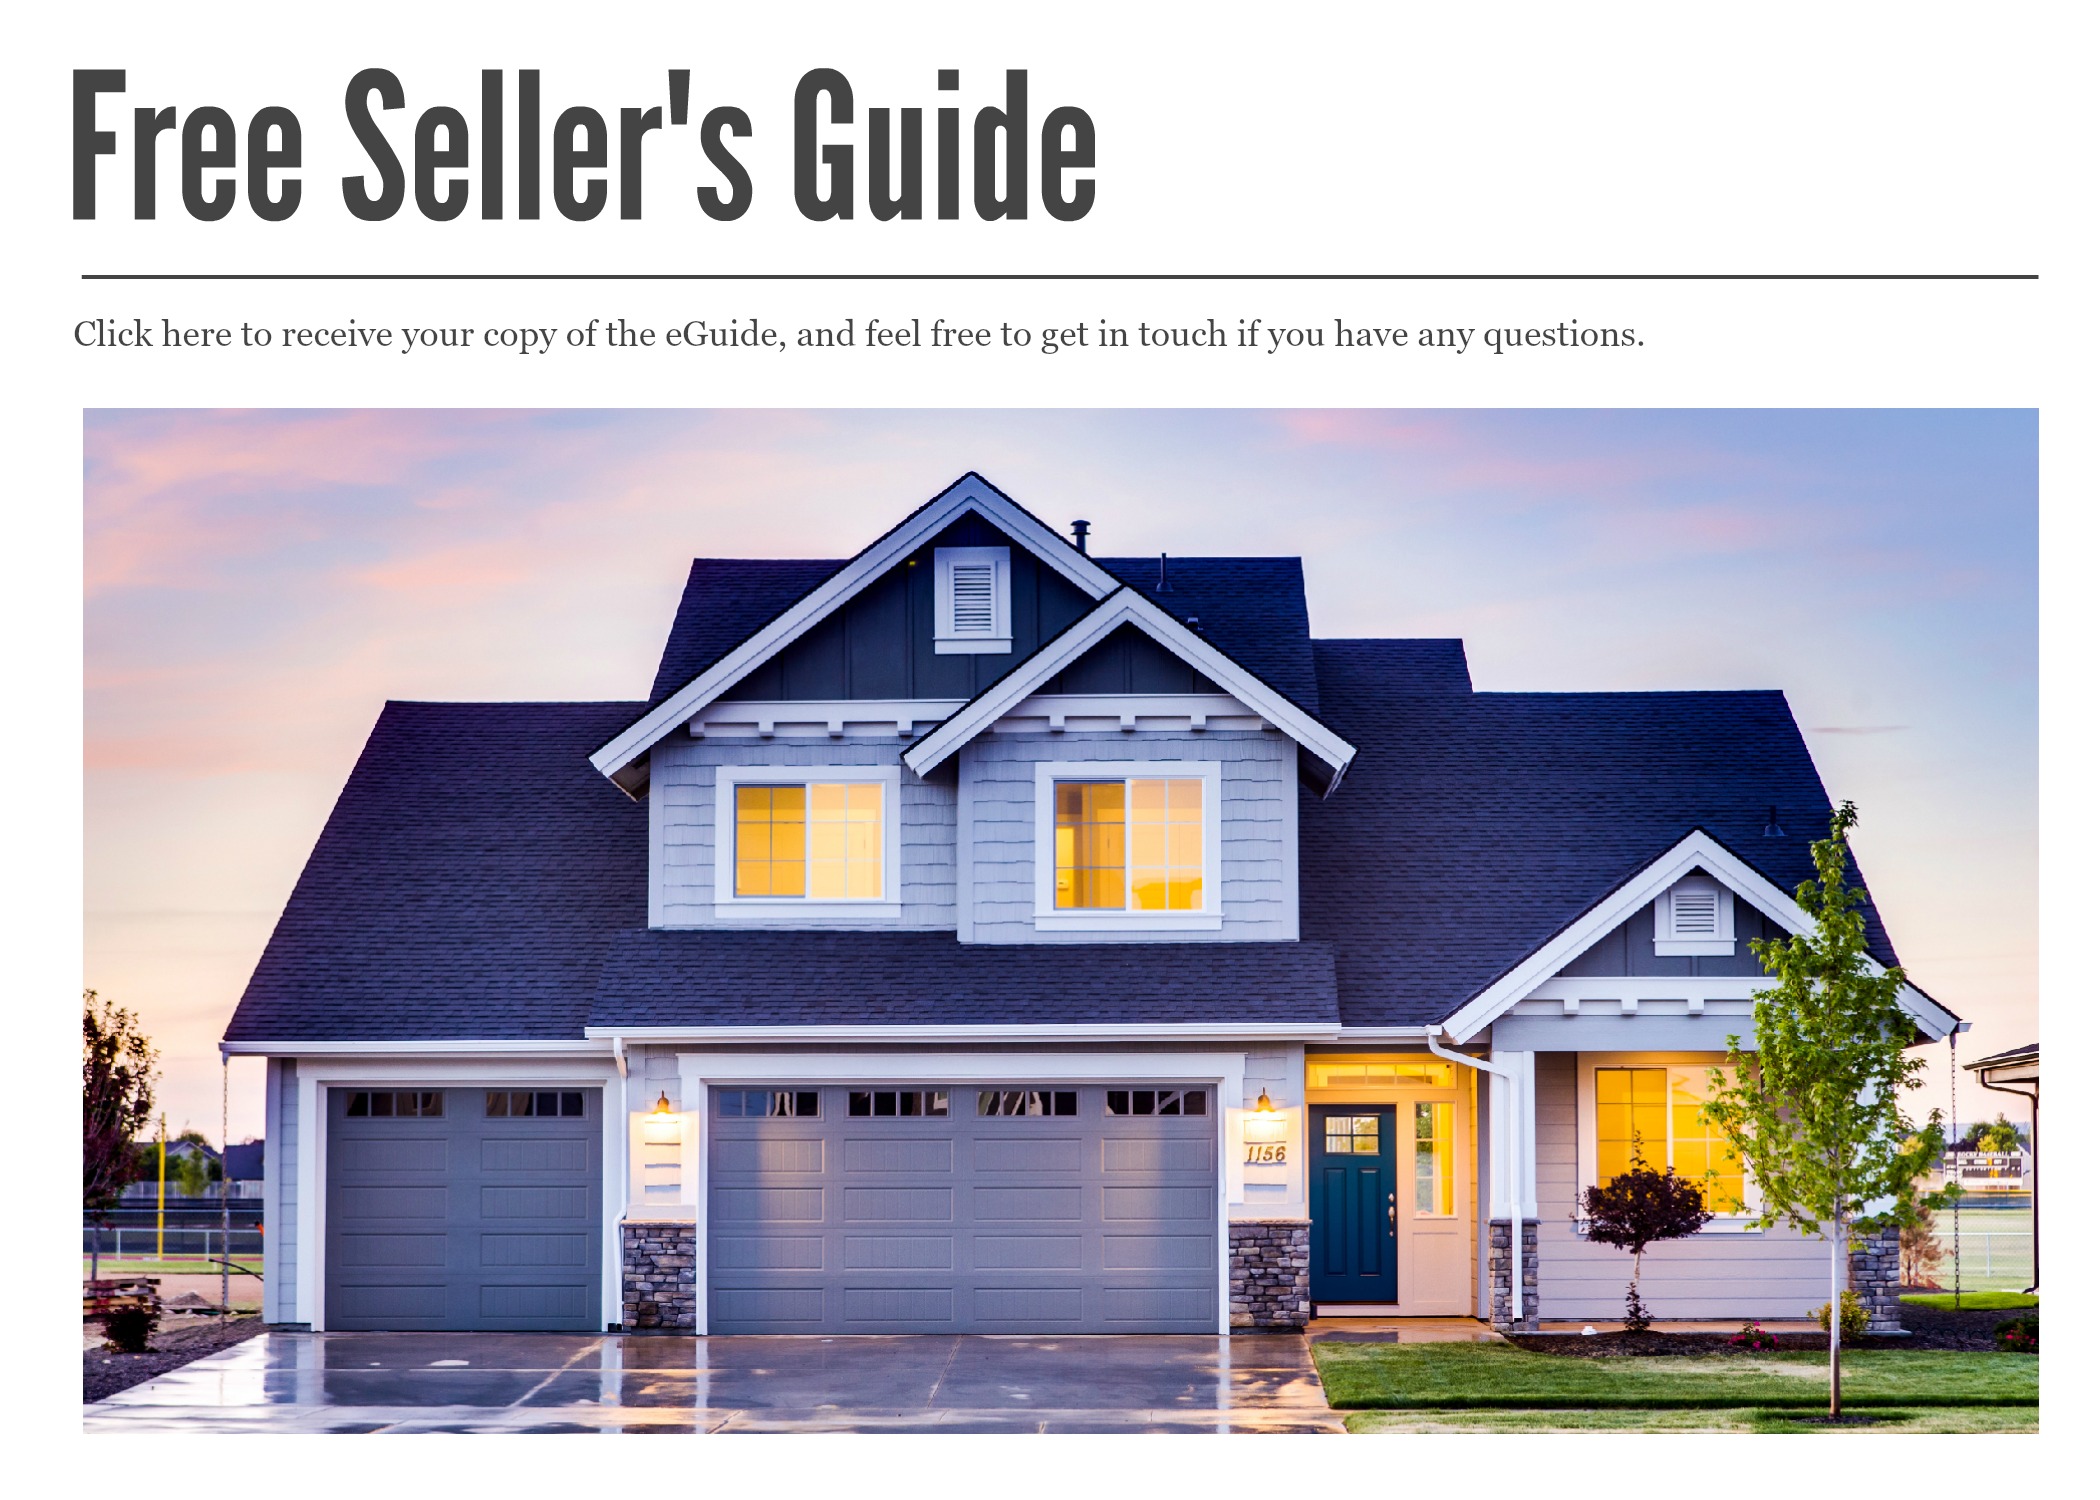 Thinking About Selling Your Home?